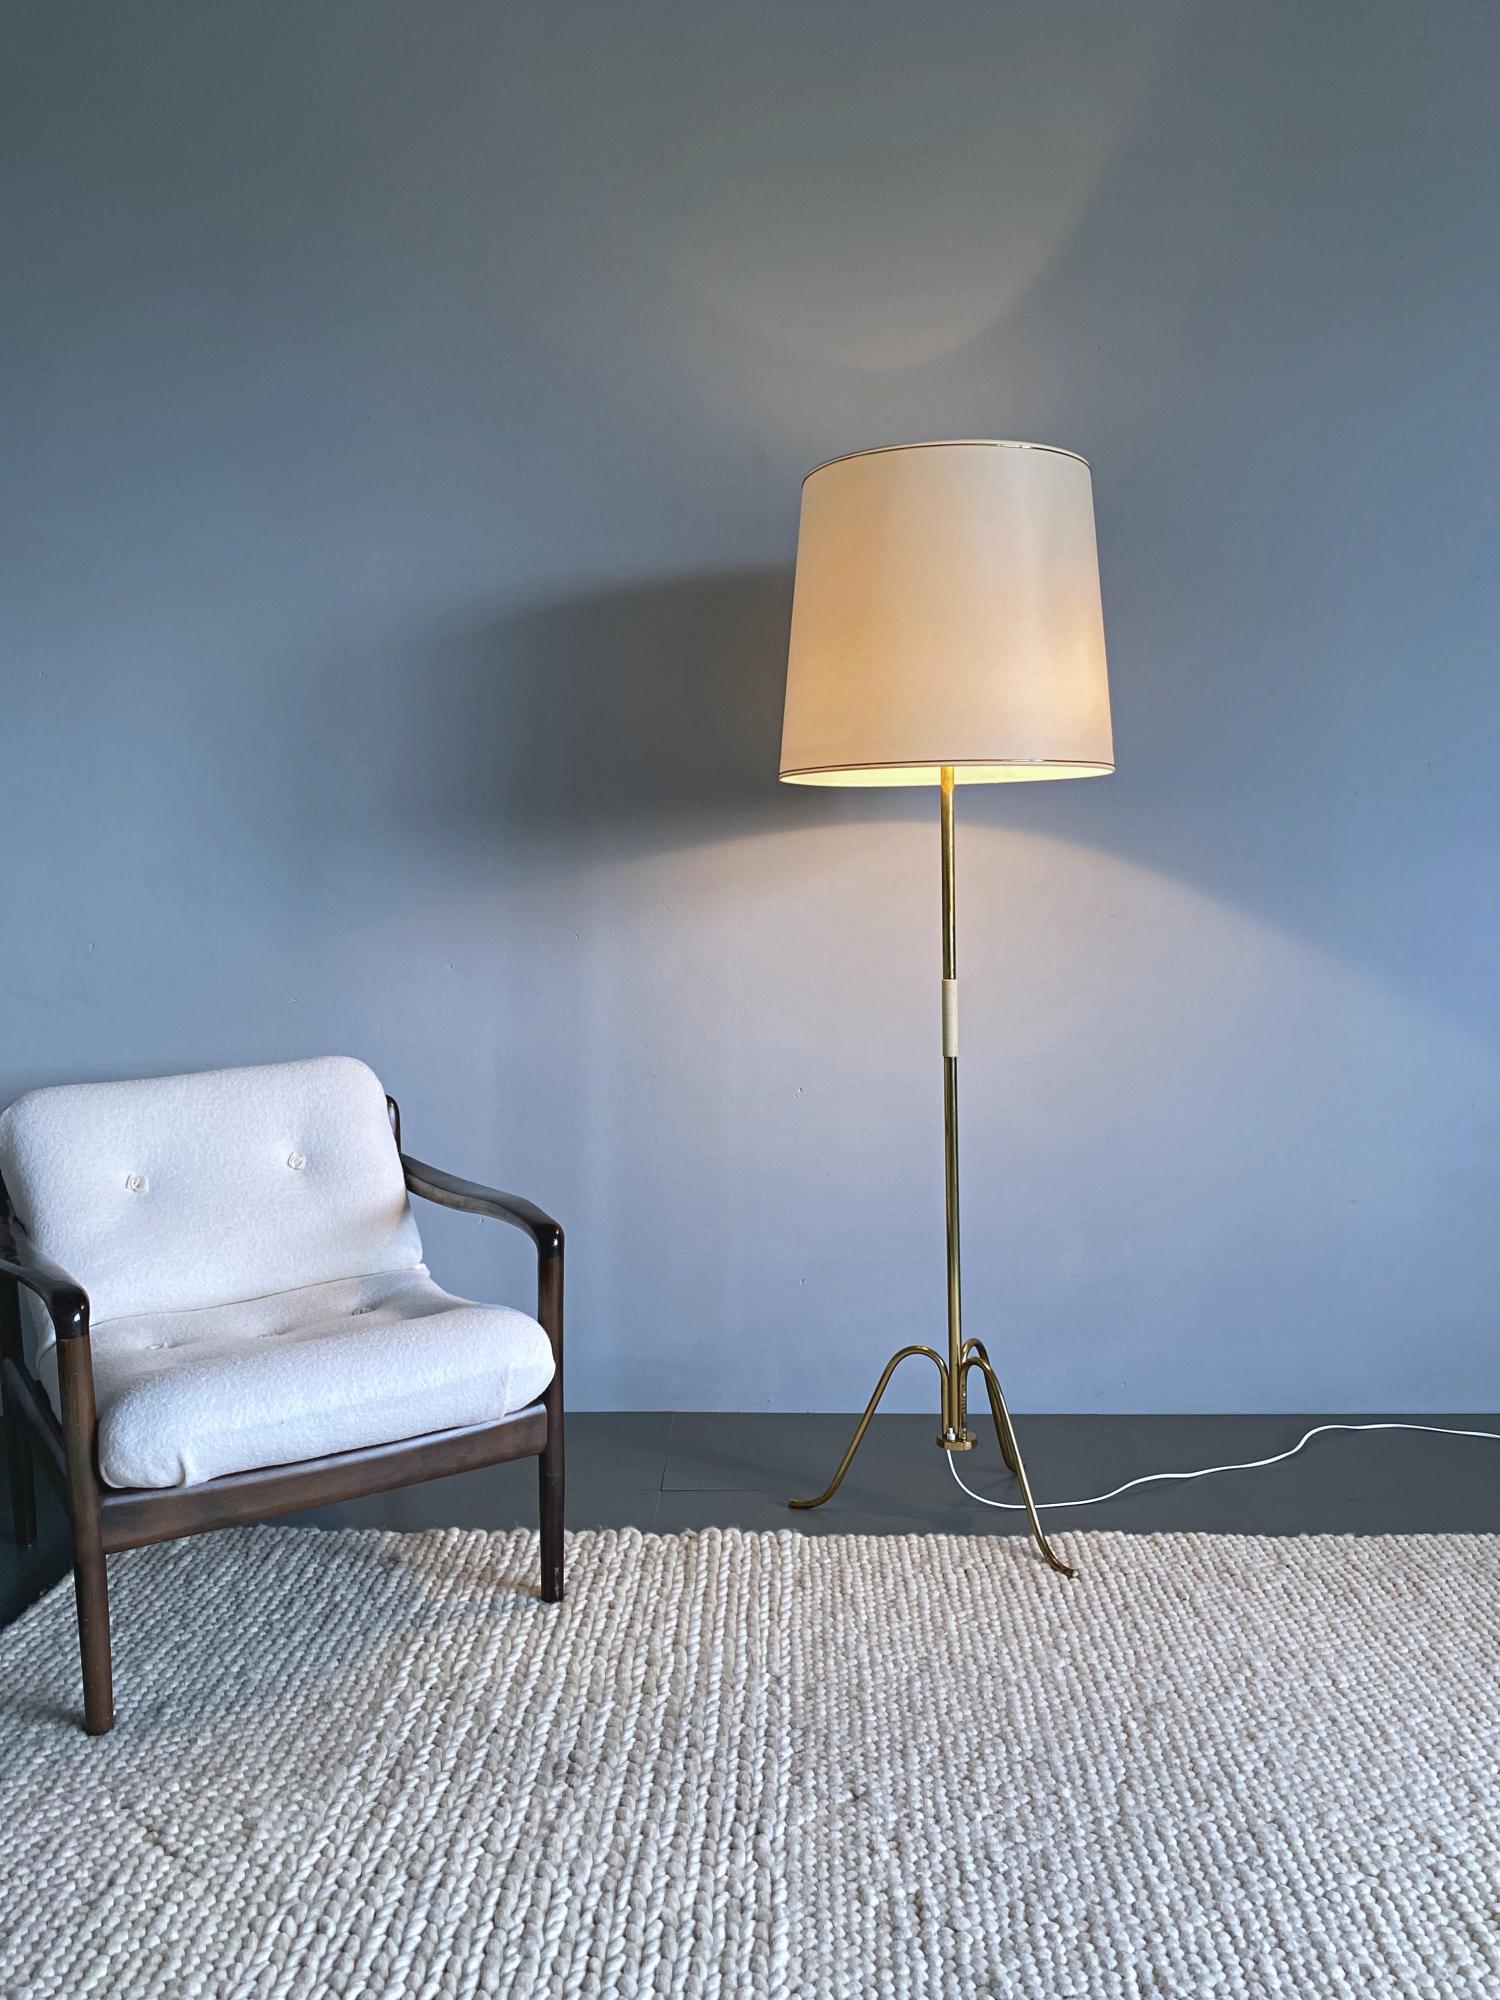 Simple and elegant midcentury floor lamp by J.T. Kalmar made in 50s Vienna. The lamp is made of brass tube and has a polished brass tripod base. The big shade provides a smooth large-area light. The lamp is in excellent condition with nice patina on